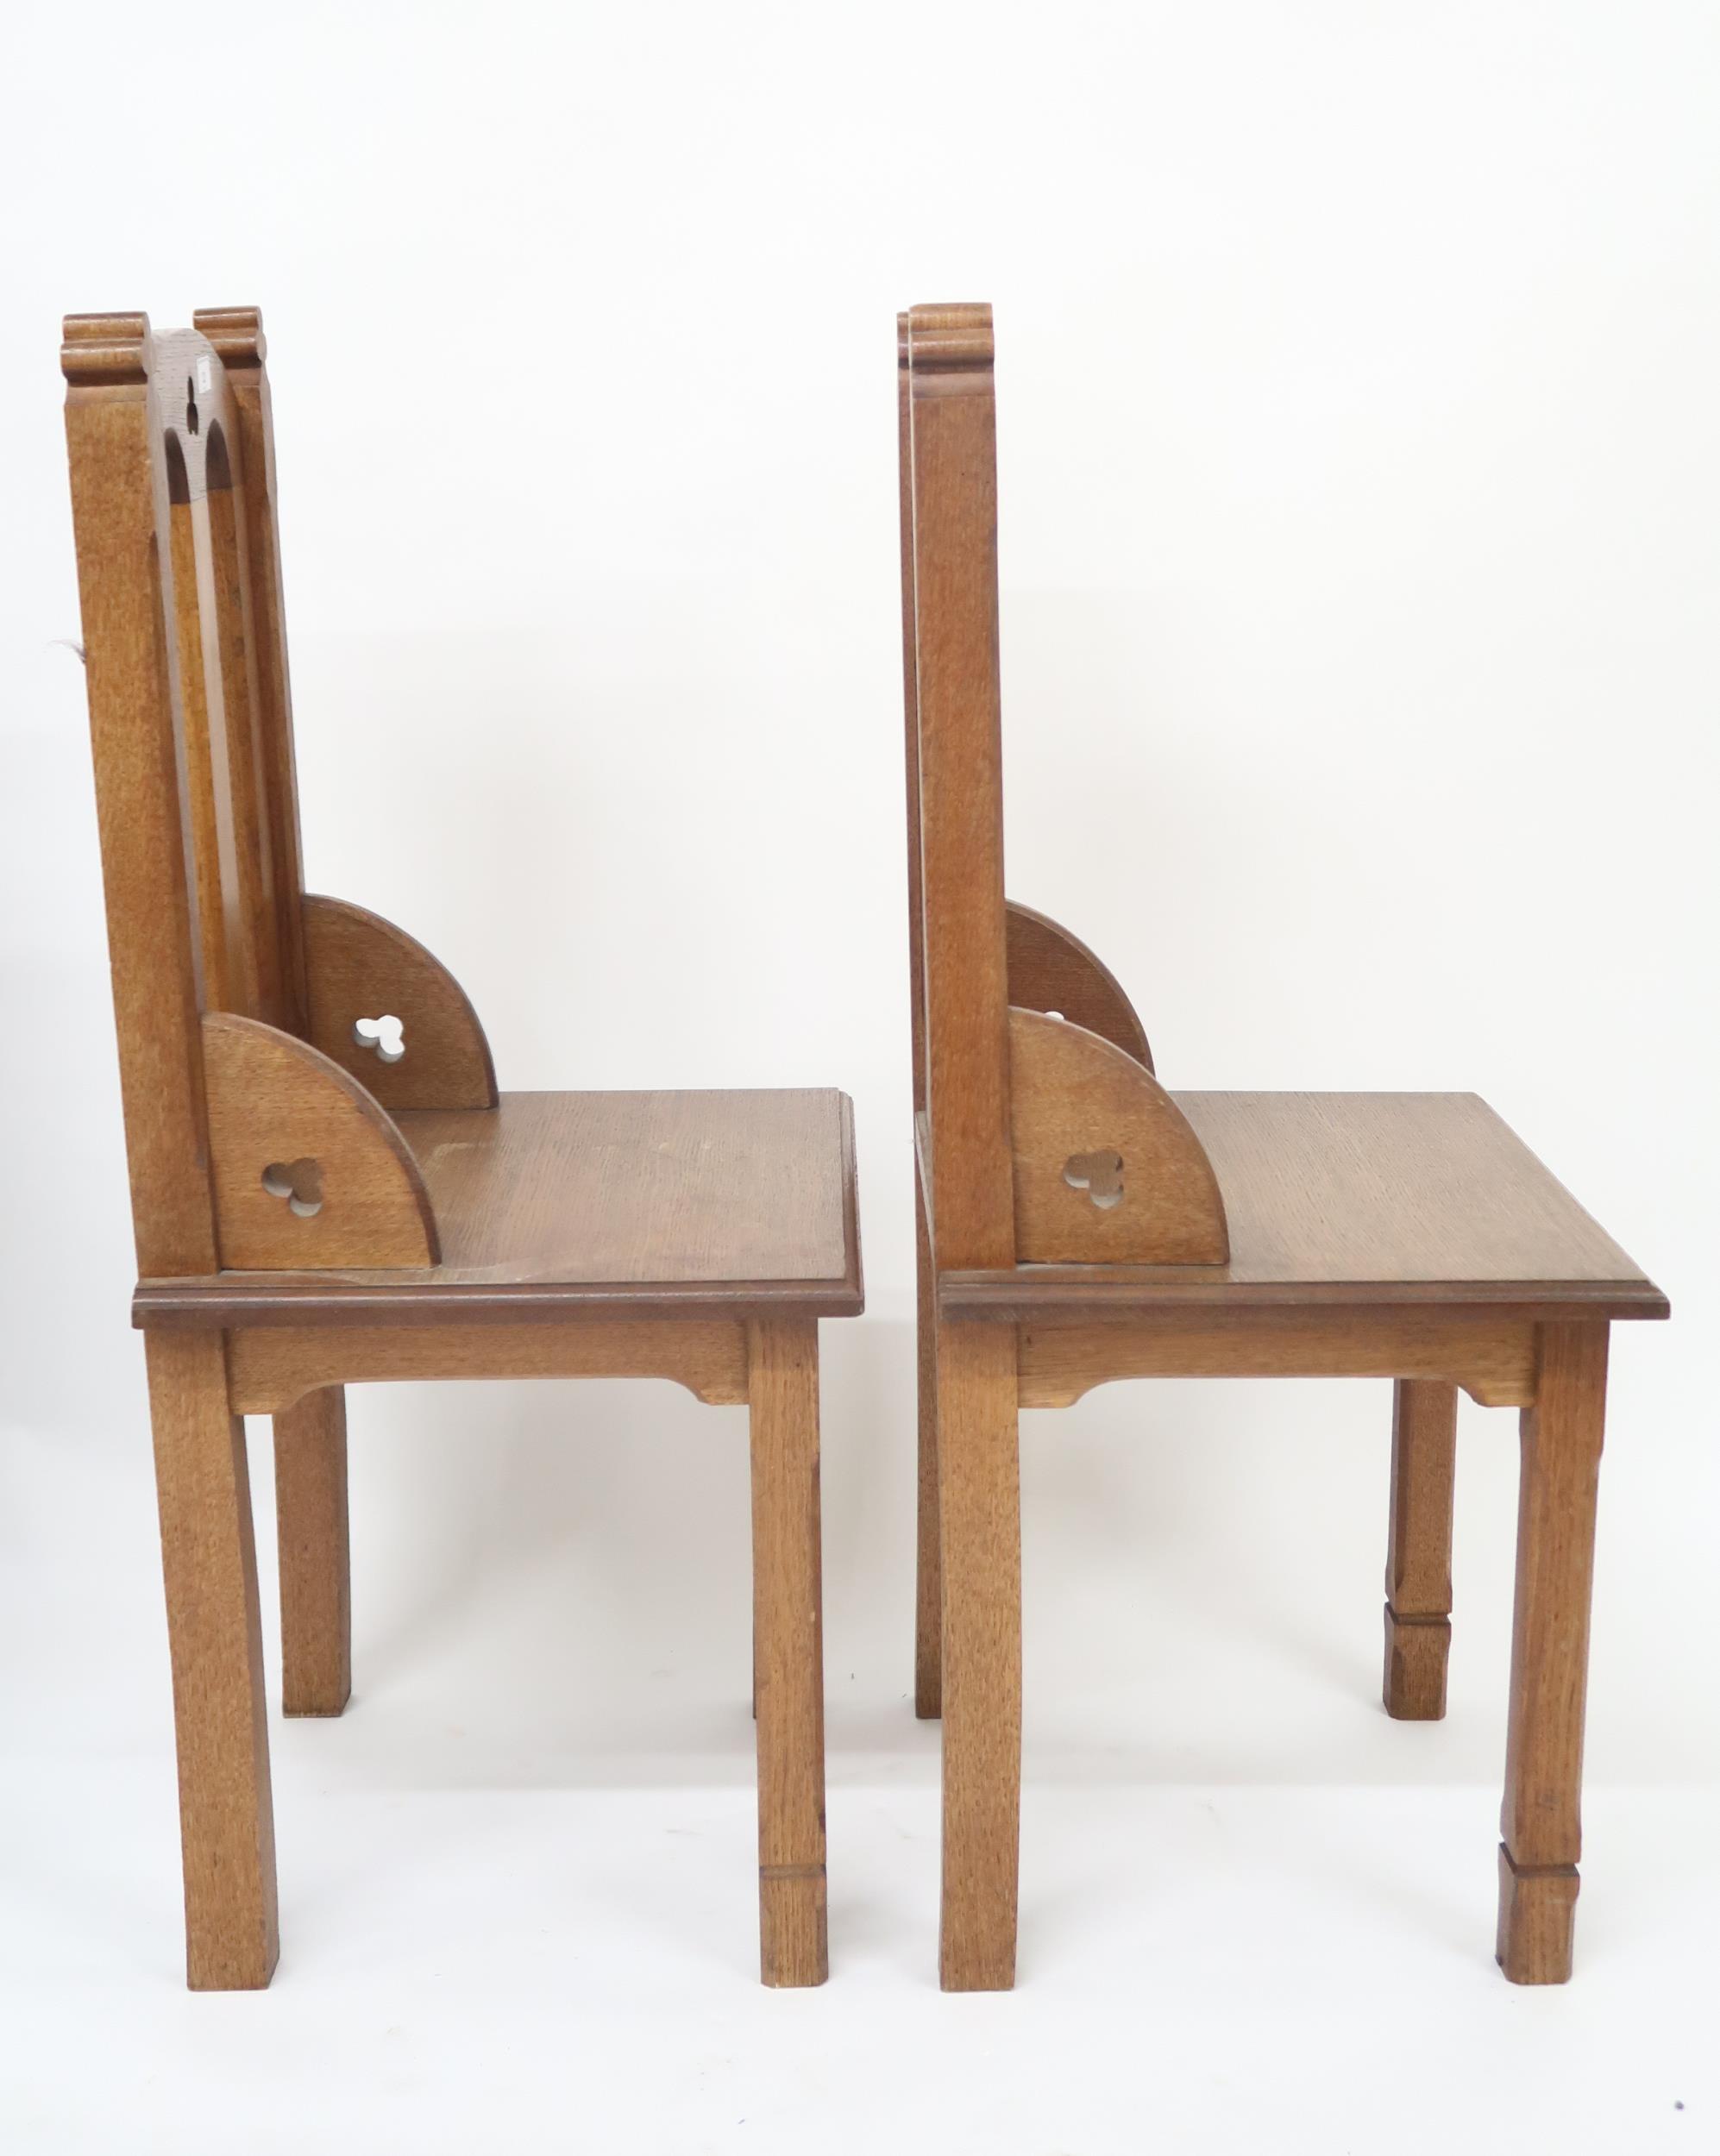 A pair of early 20th century oak ecclesiastical style chairs with pierced trefoil decorations on - Image 2 of 2